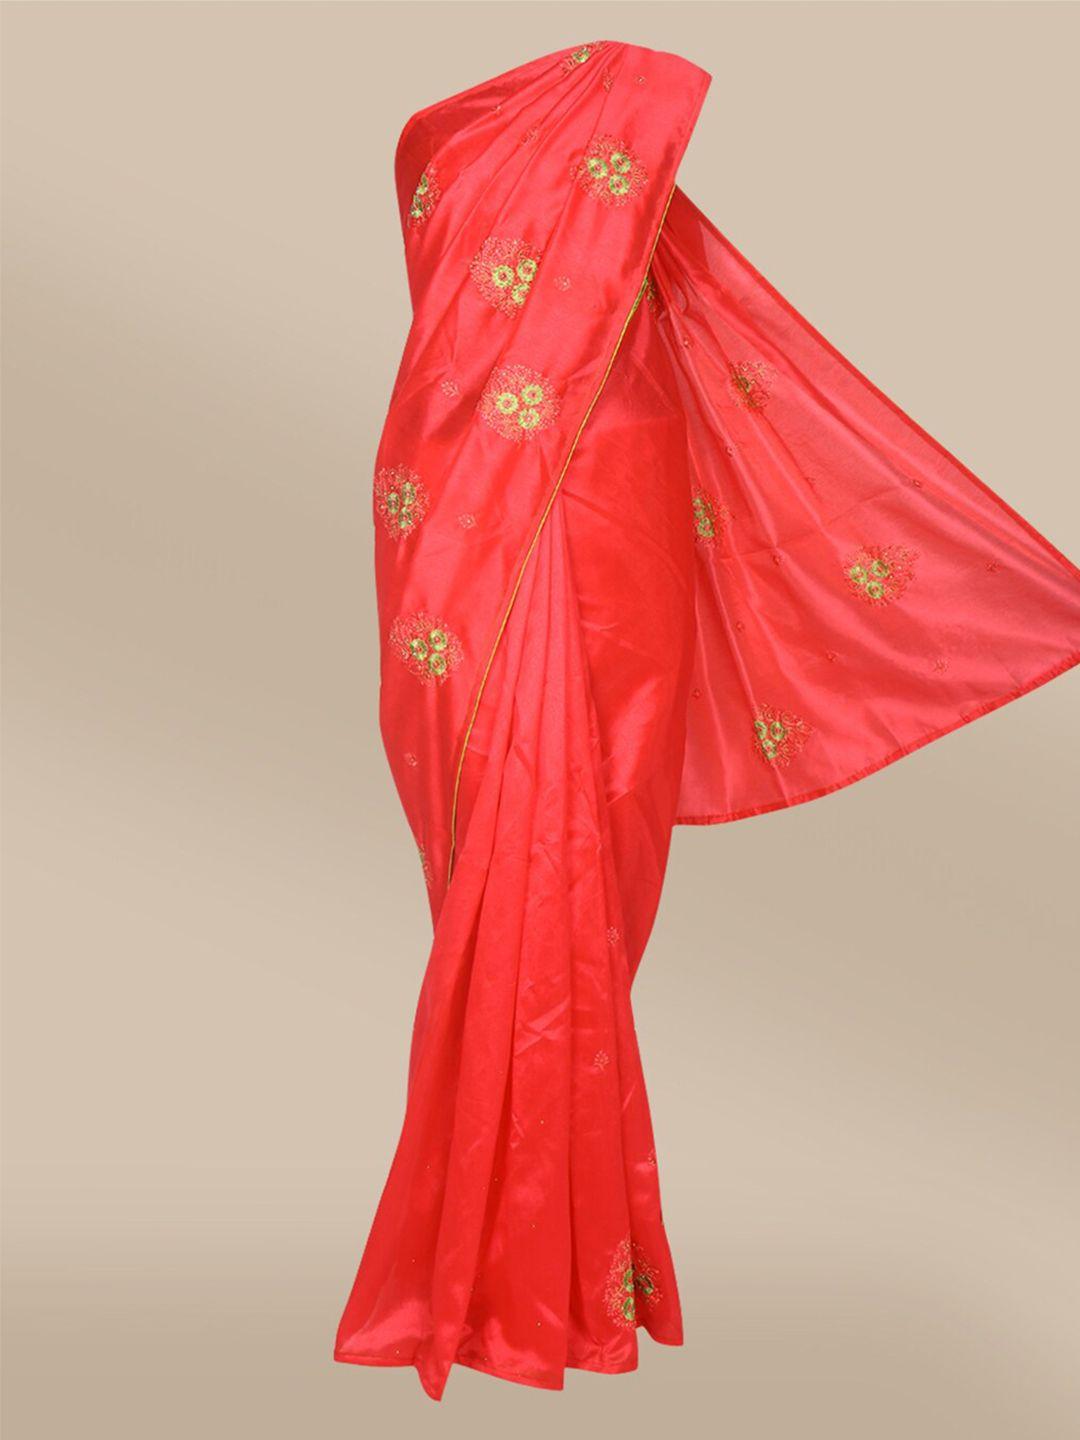 the-chennai-silks-pink-&-green-floral-embroidered-fusion-saree